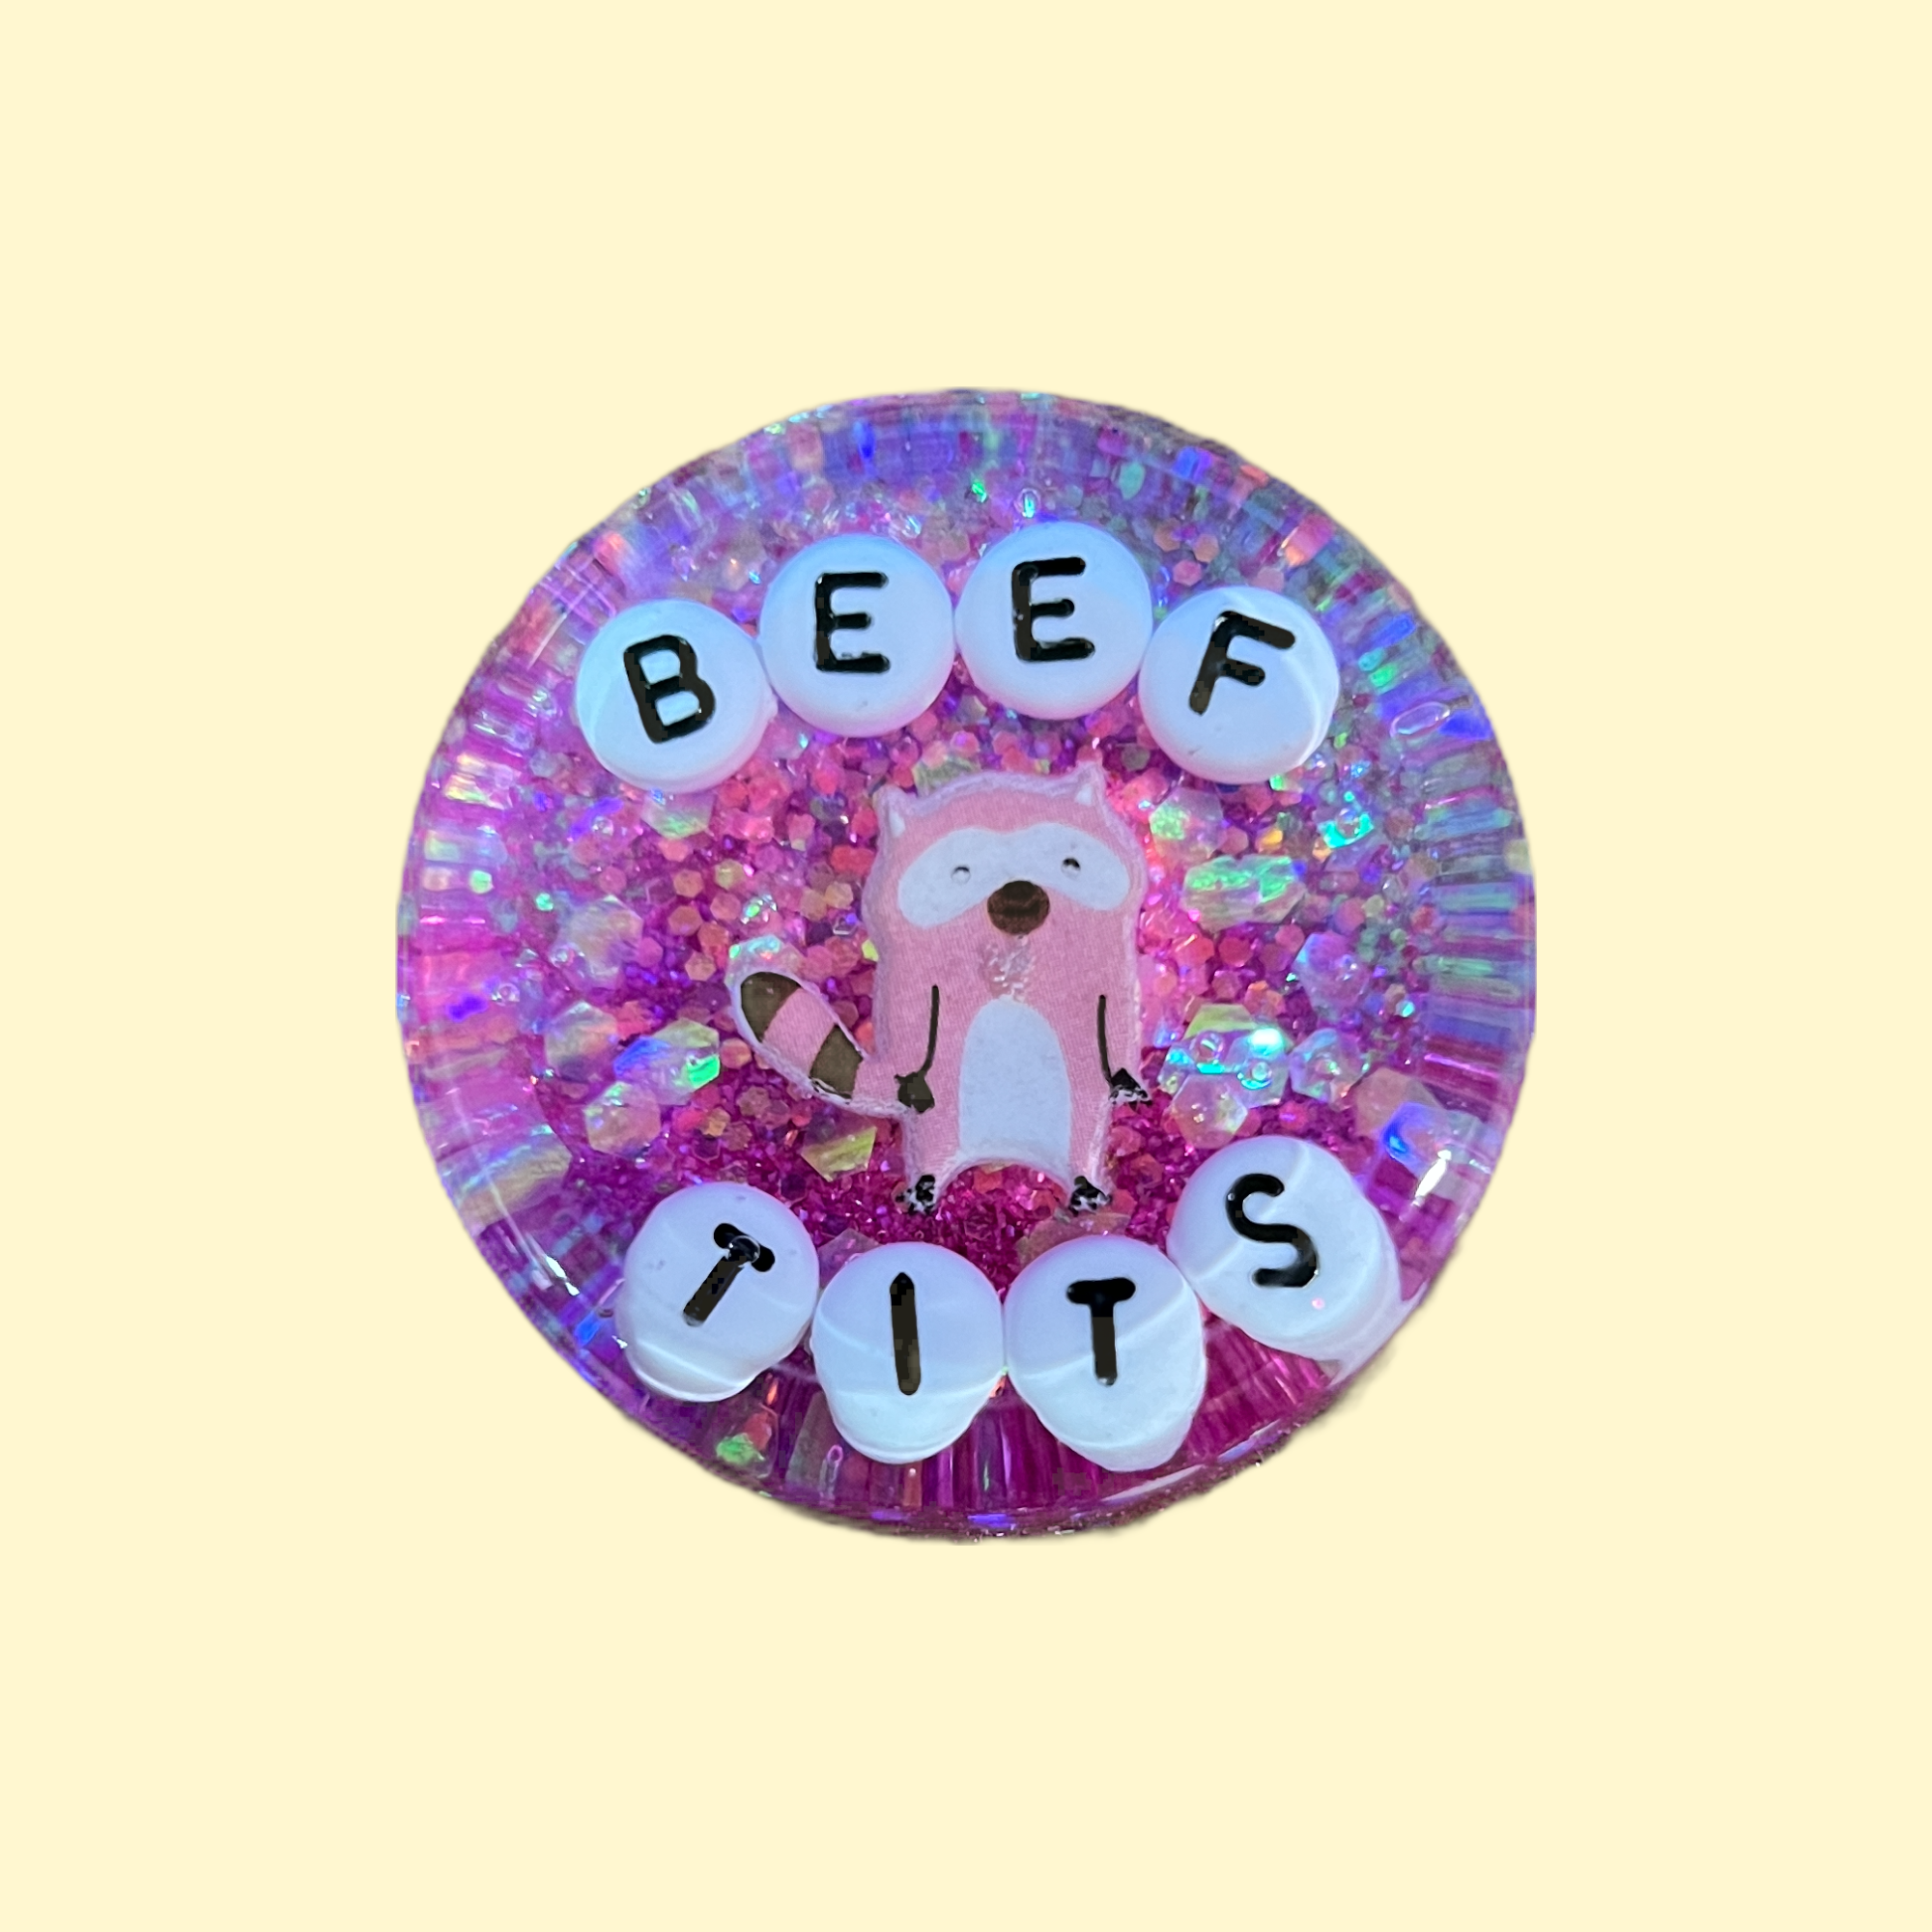 Beef Tits - Shower Art - READY TO SHIP